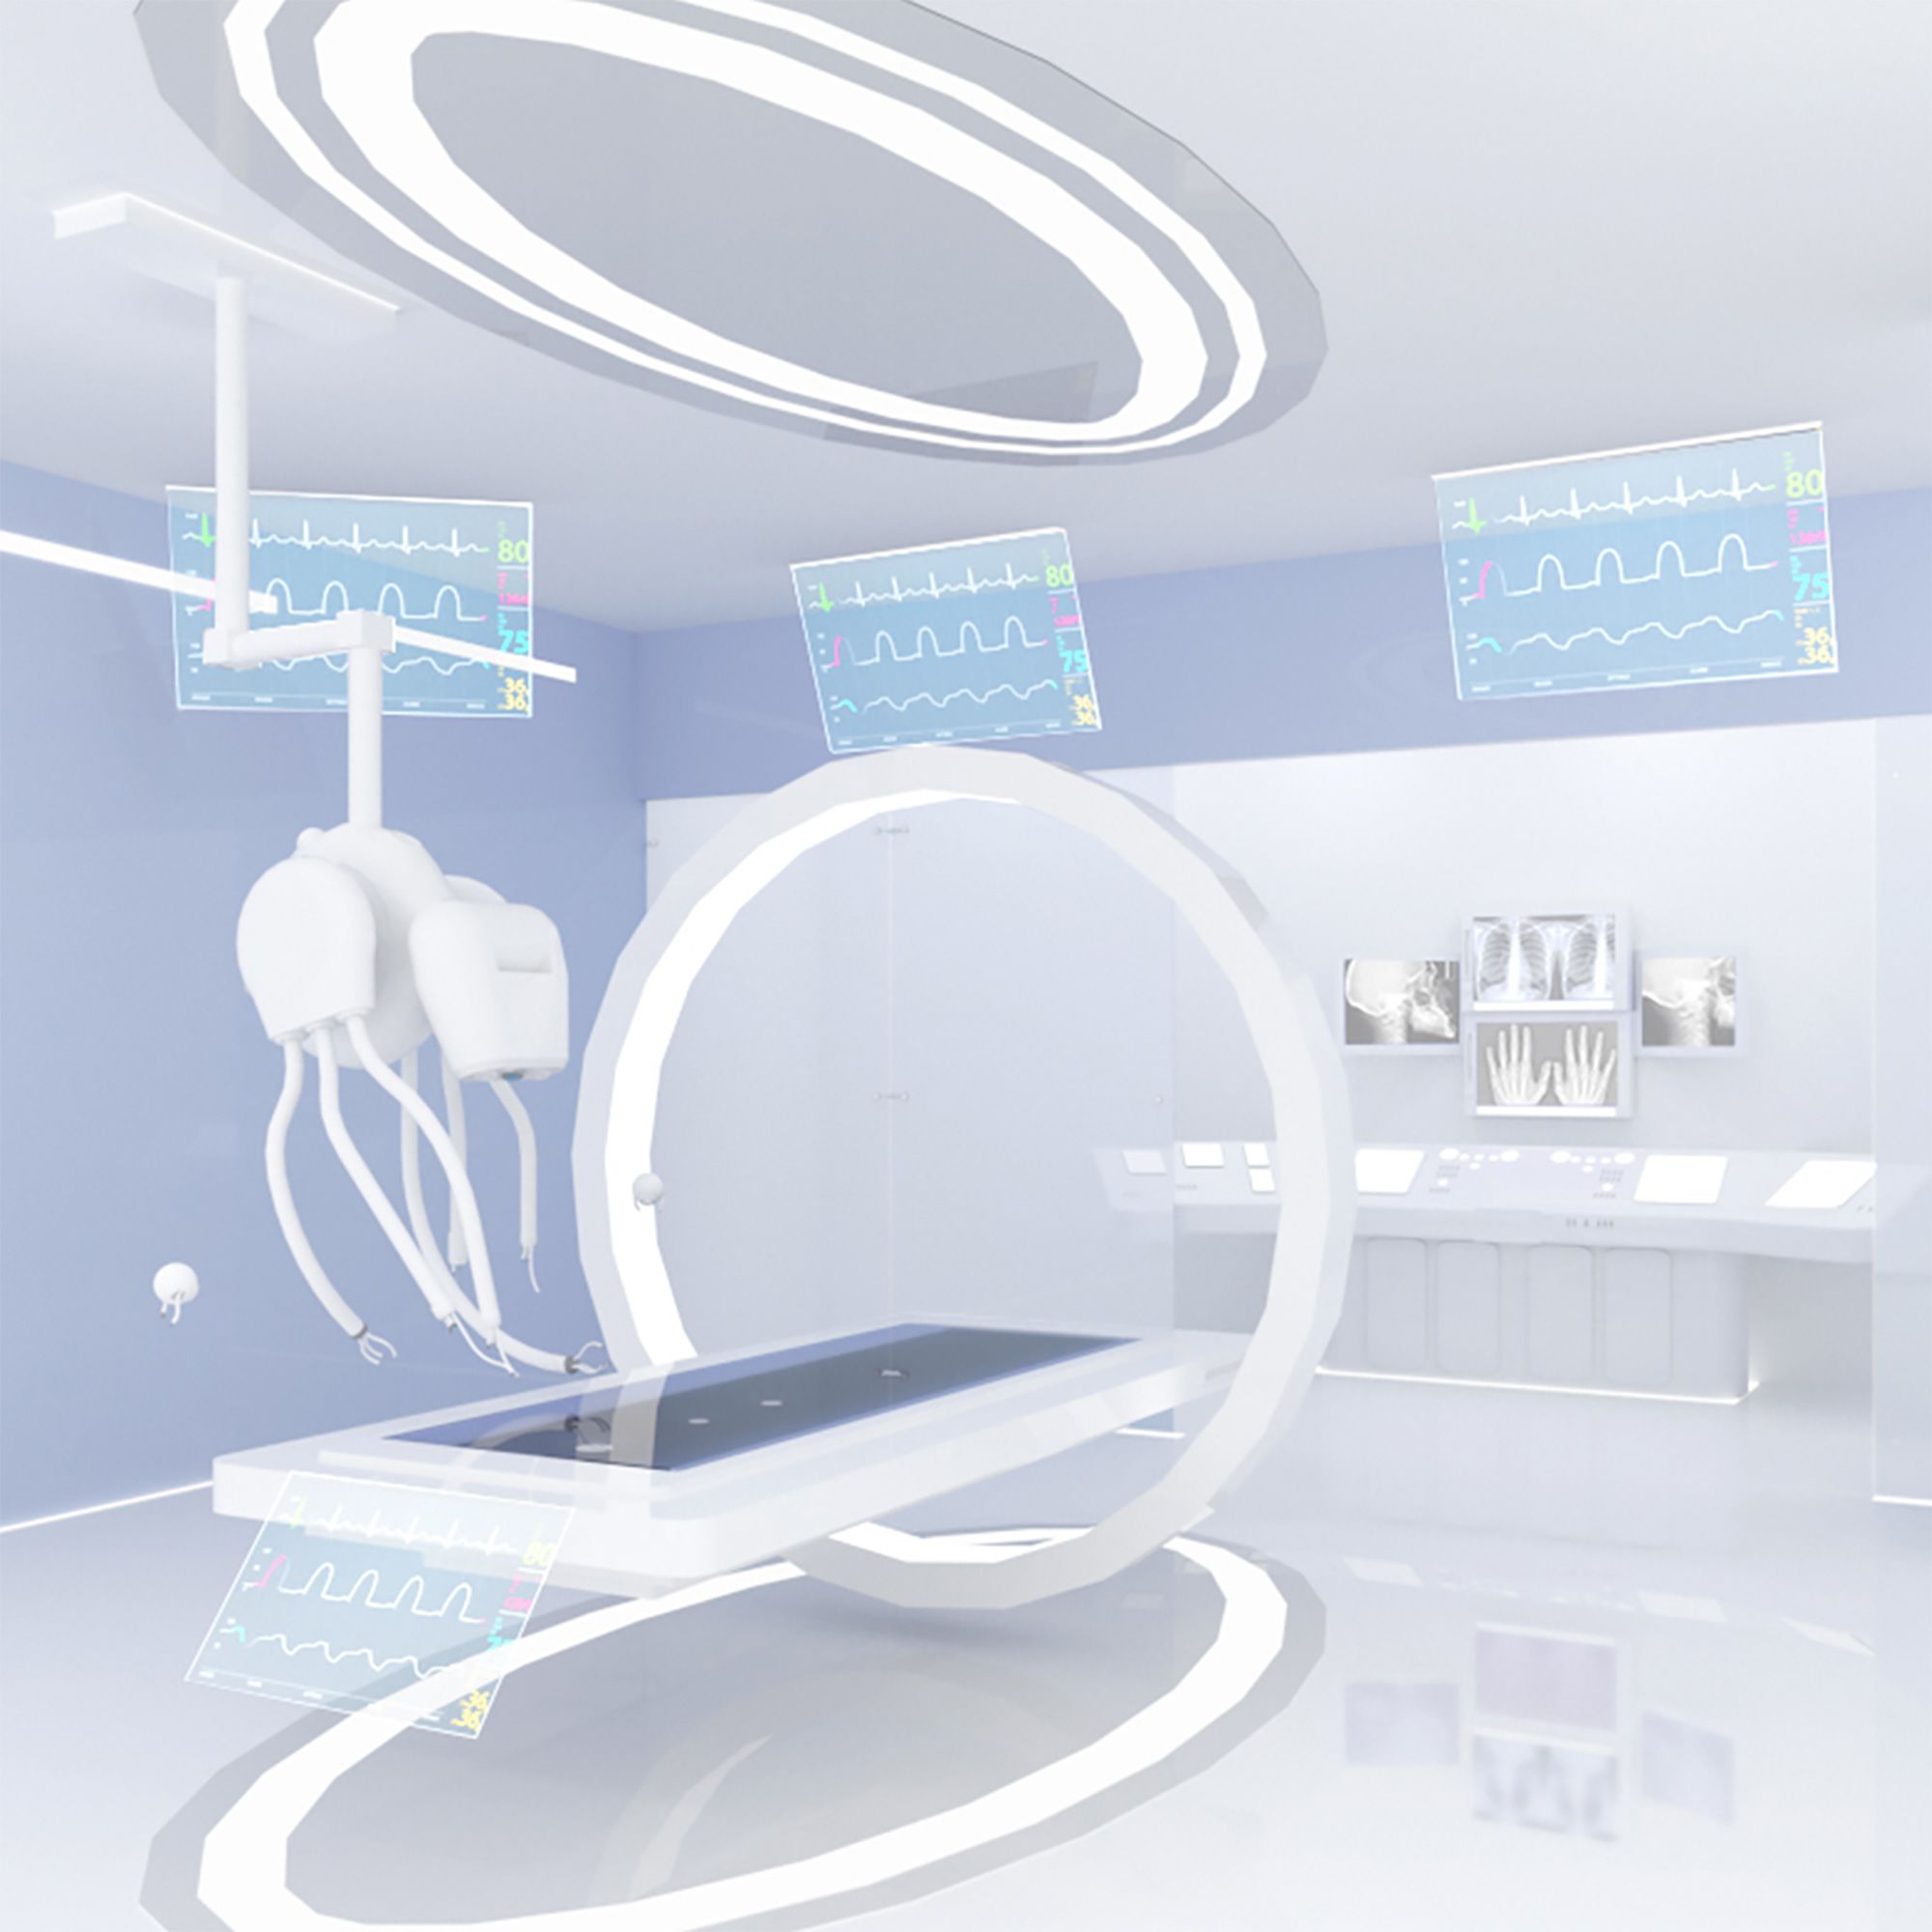 Image shows a design of futuristic surgery room. Centre is an operating table, overlooked by a robot which would perform the surgery. In the room there are a number of screens with patient detail such as blood pressure and heart rate.